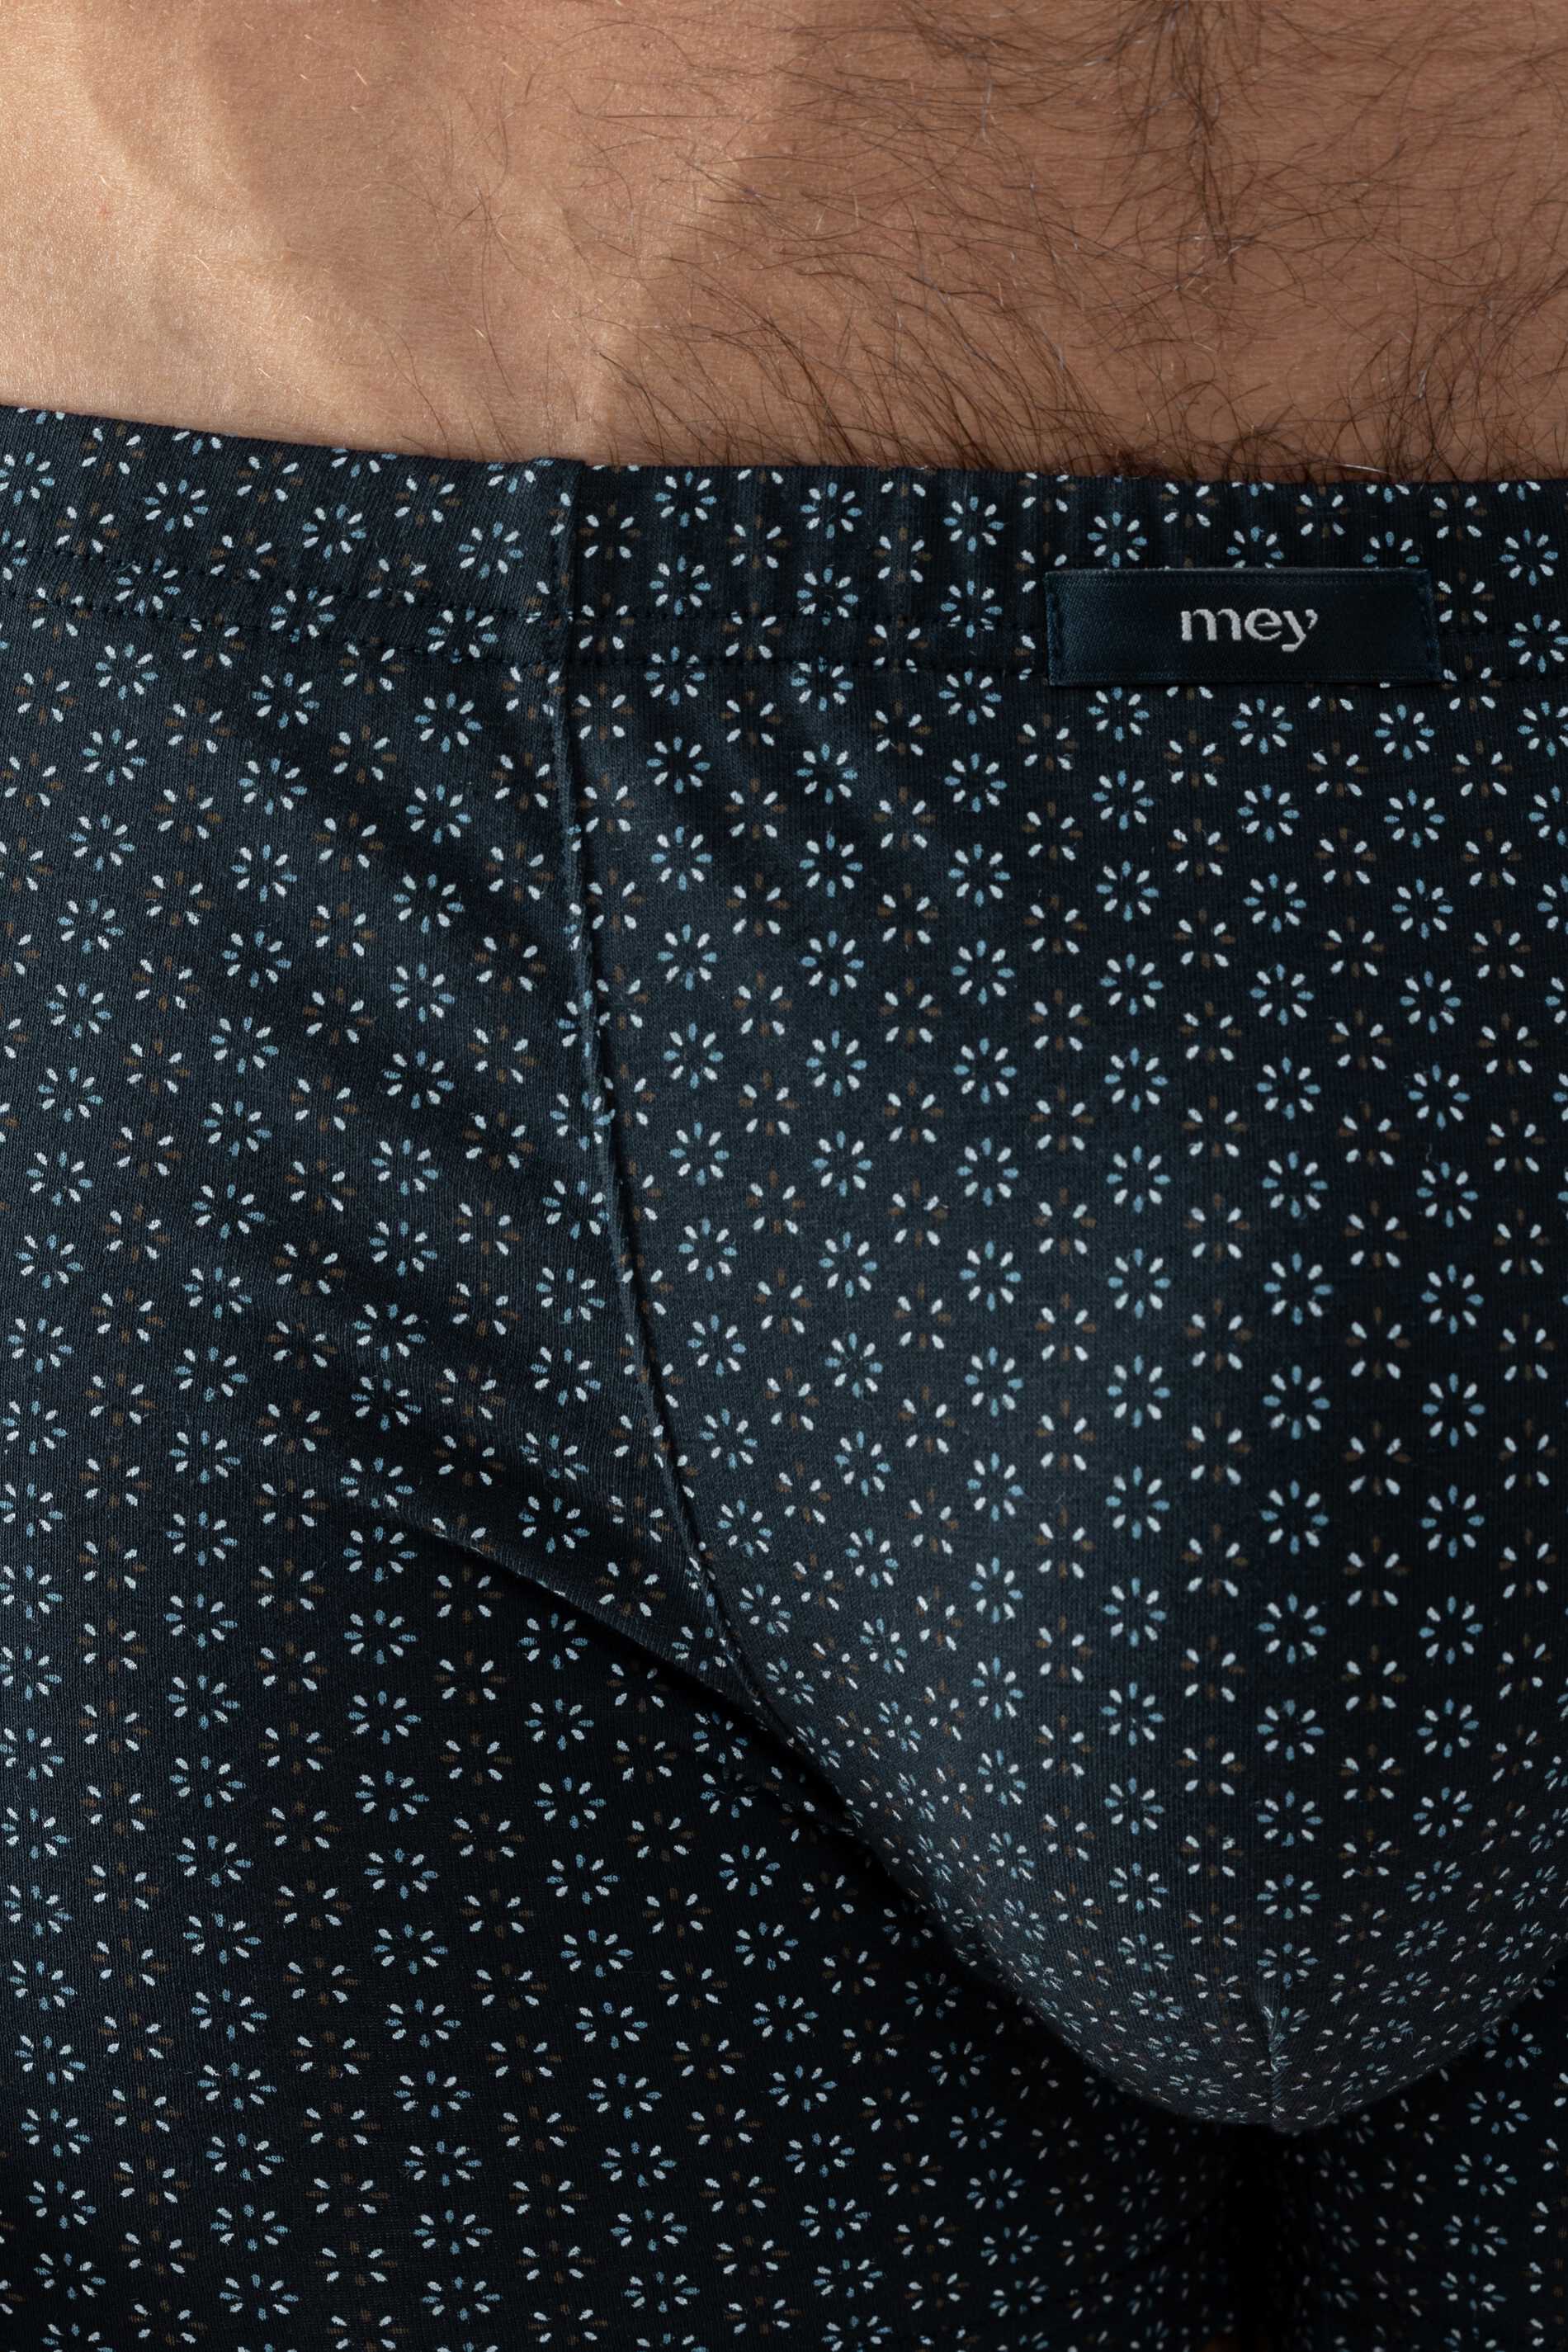 Shorty Serie Minimal Flowers Detail View 01 | mey®